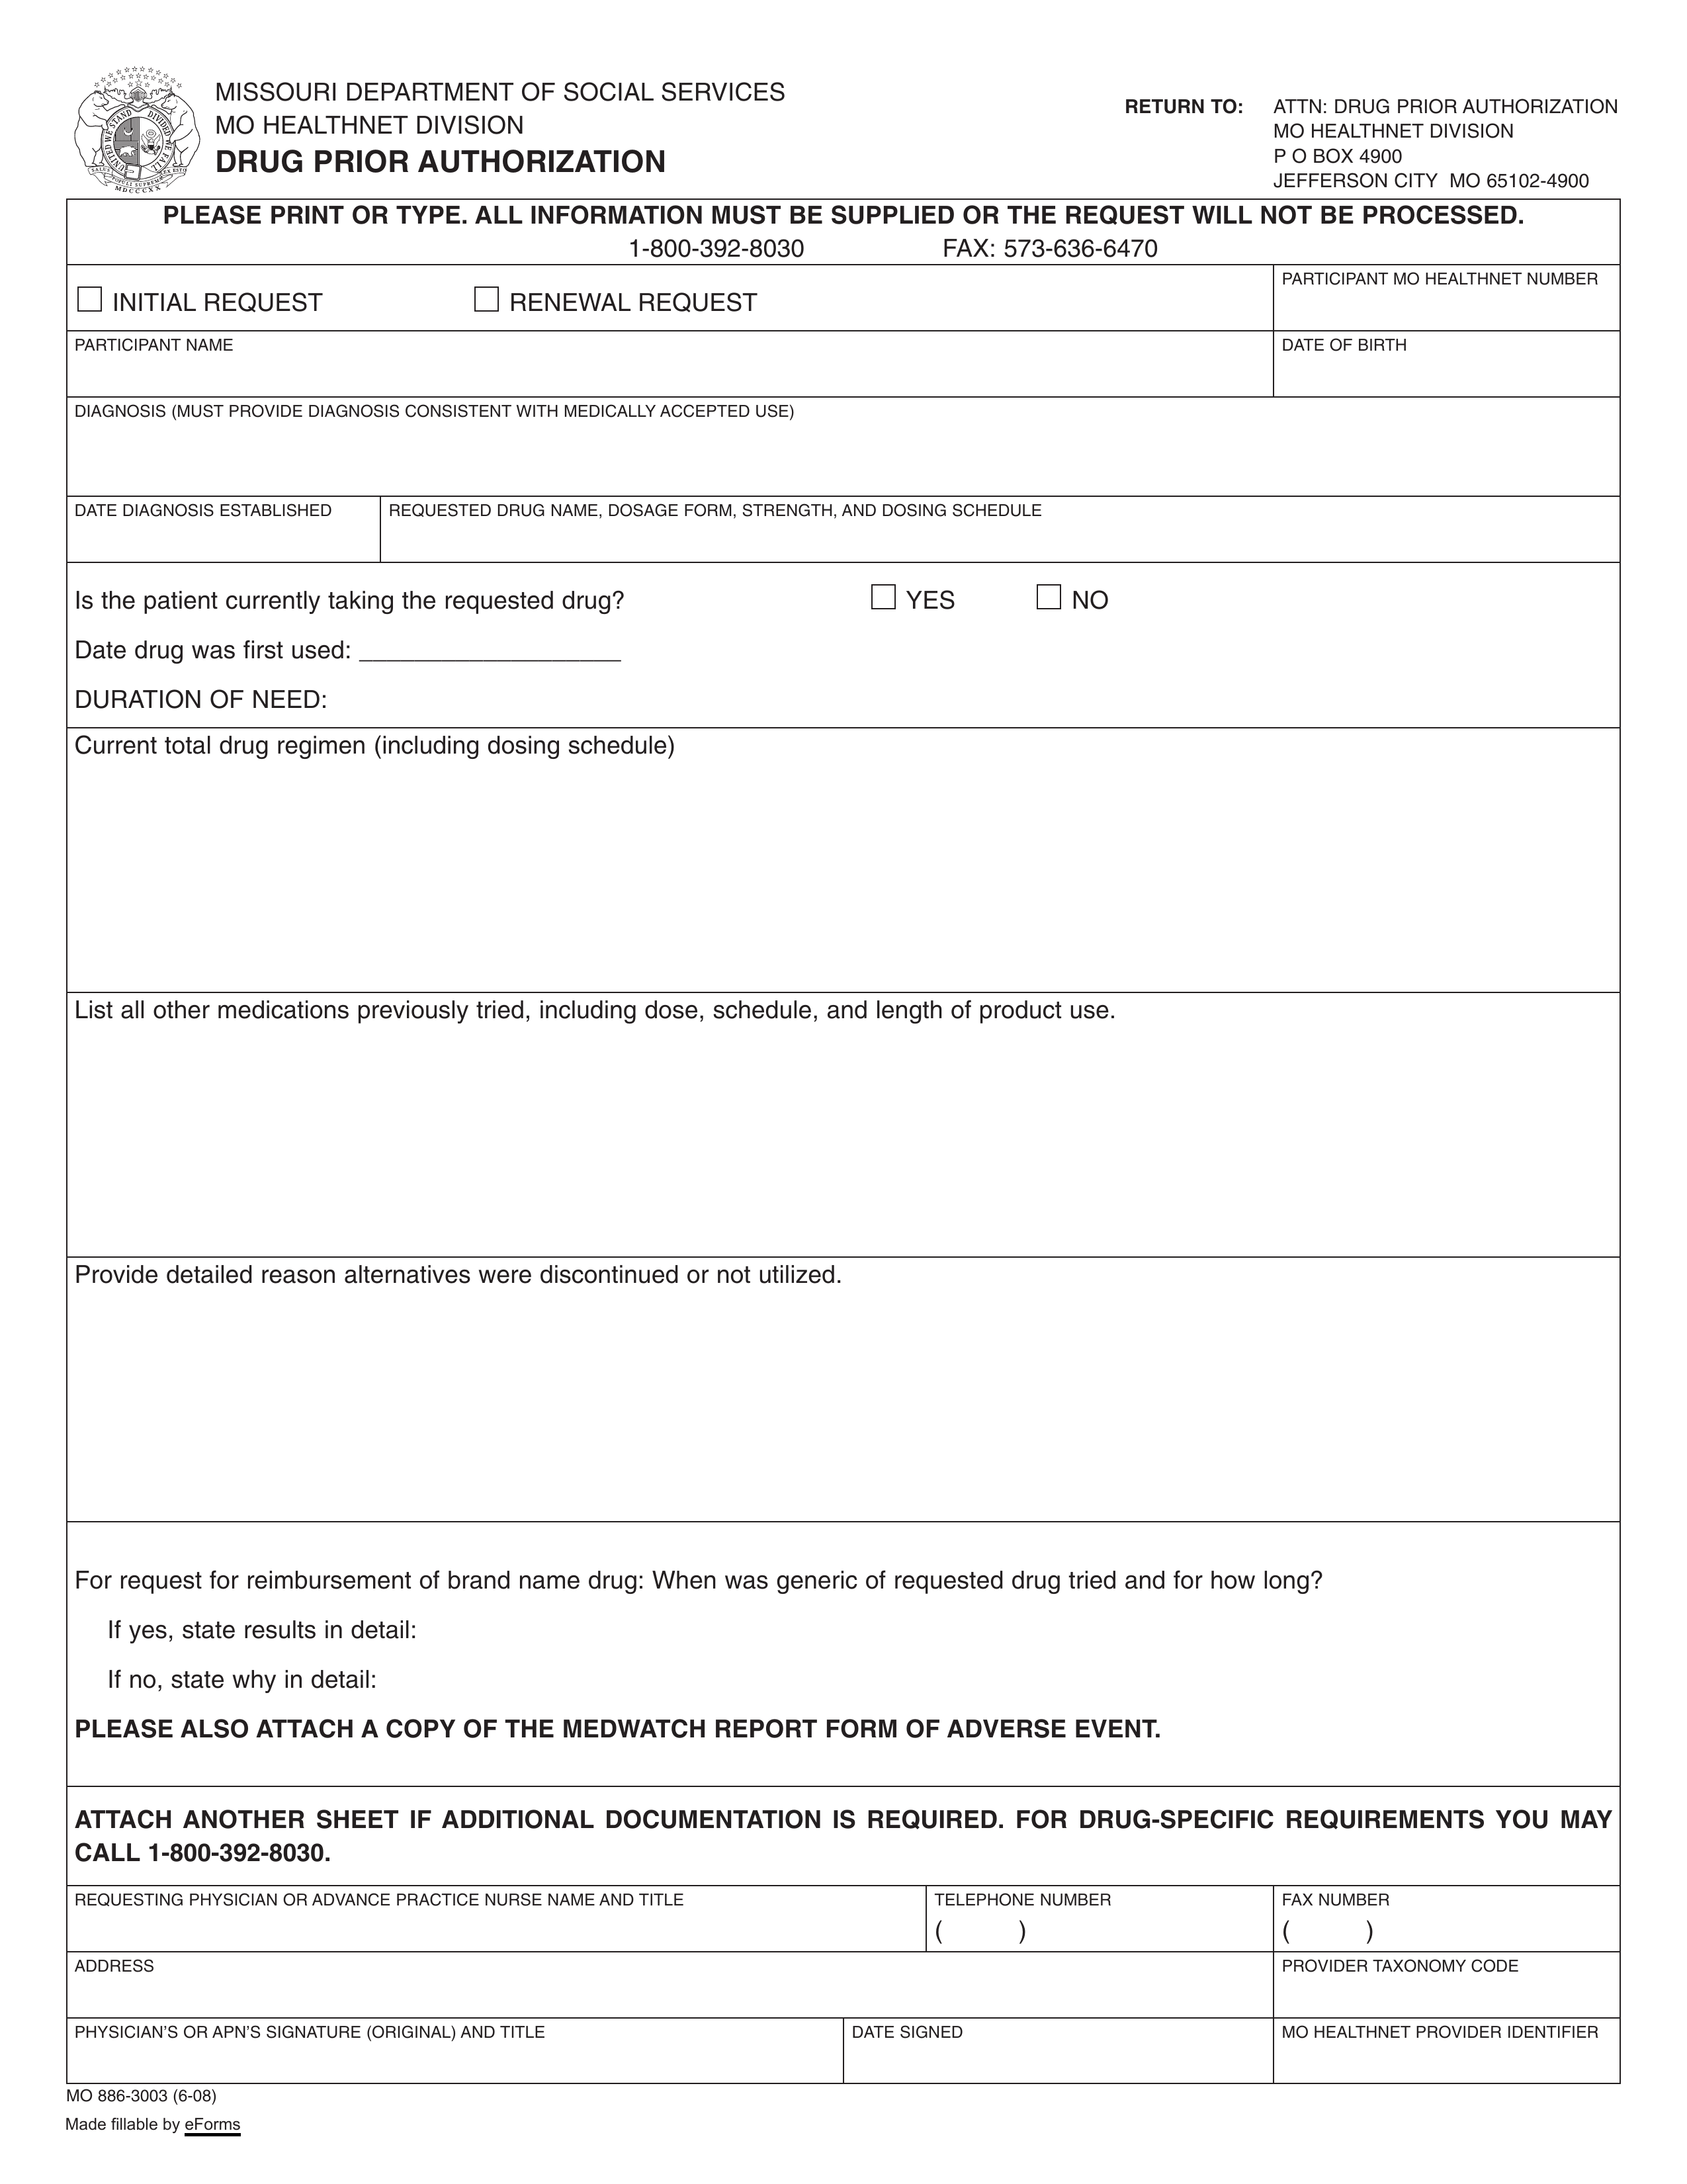 Prior authorization request forms are available for download below. 